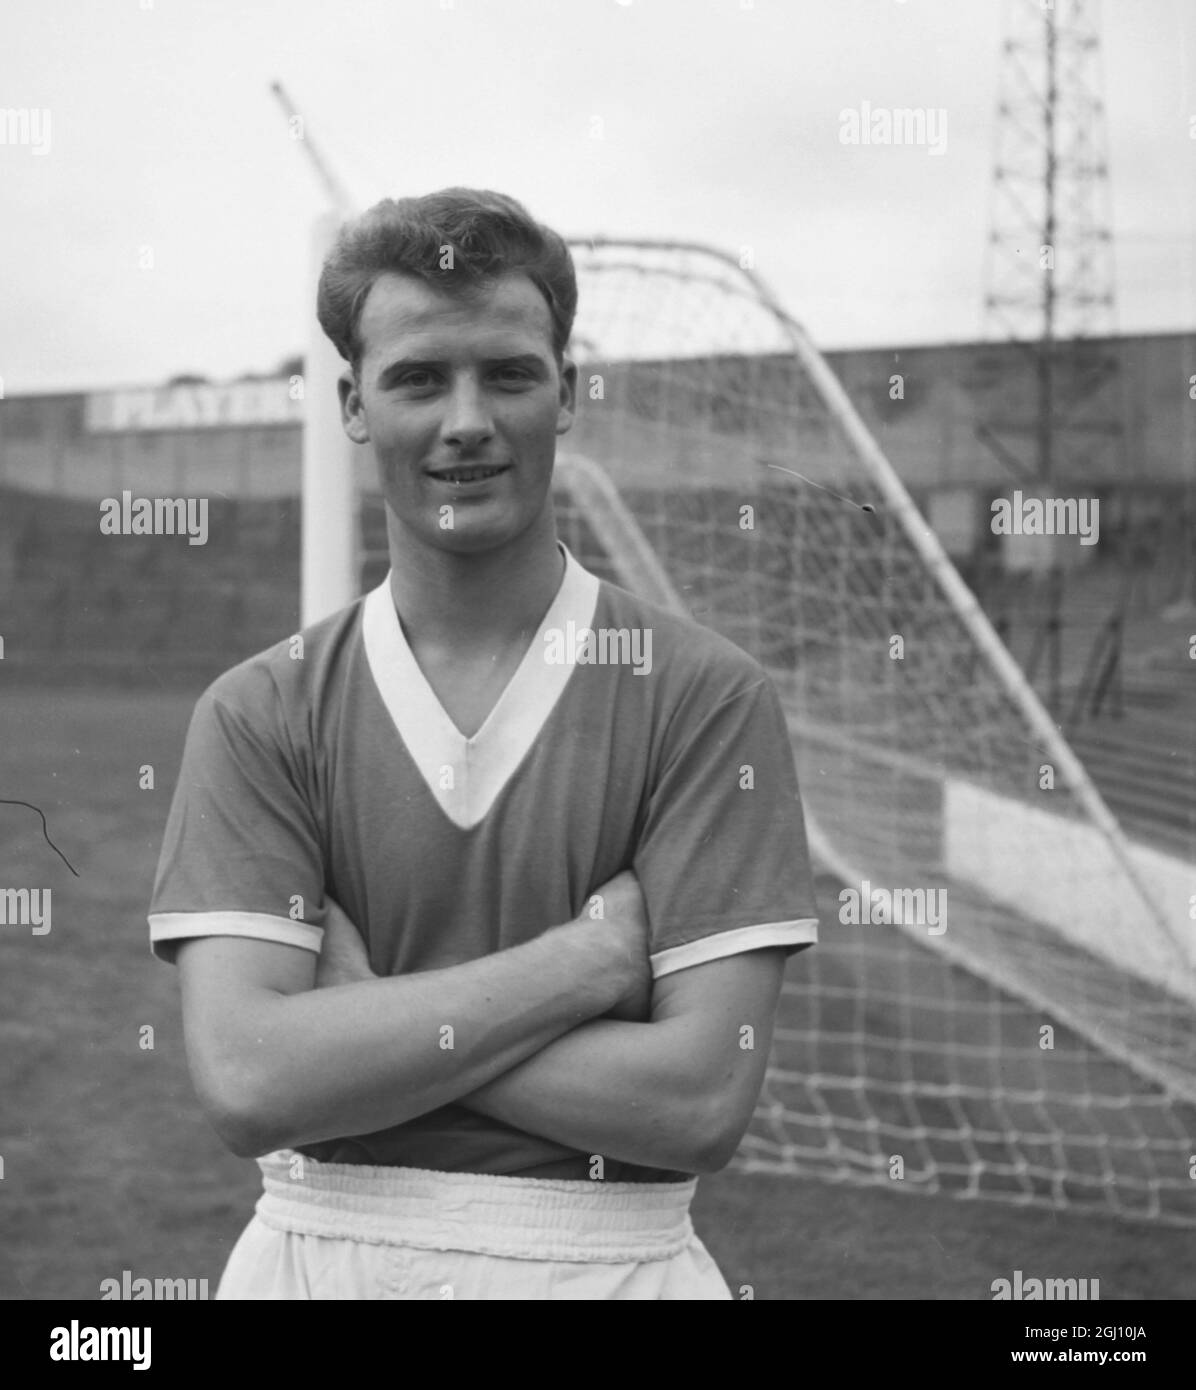 FOOTBALL MILLWALL FC - PLAYER PORTRAIT - DAVE BUMSTEAD 24 MARCH 1961 Stock Photo